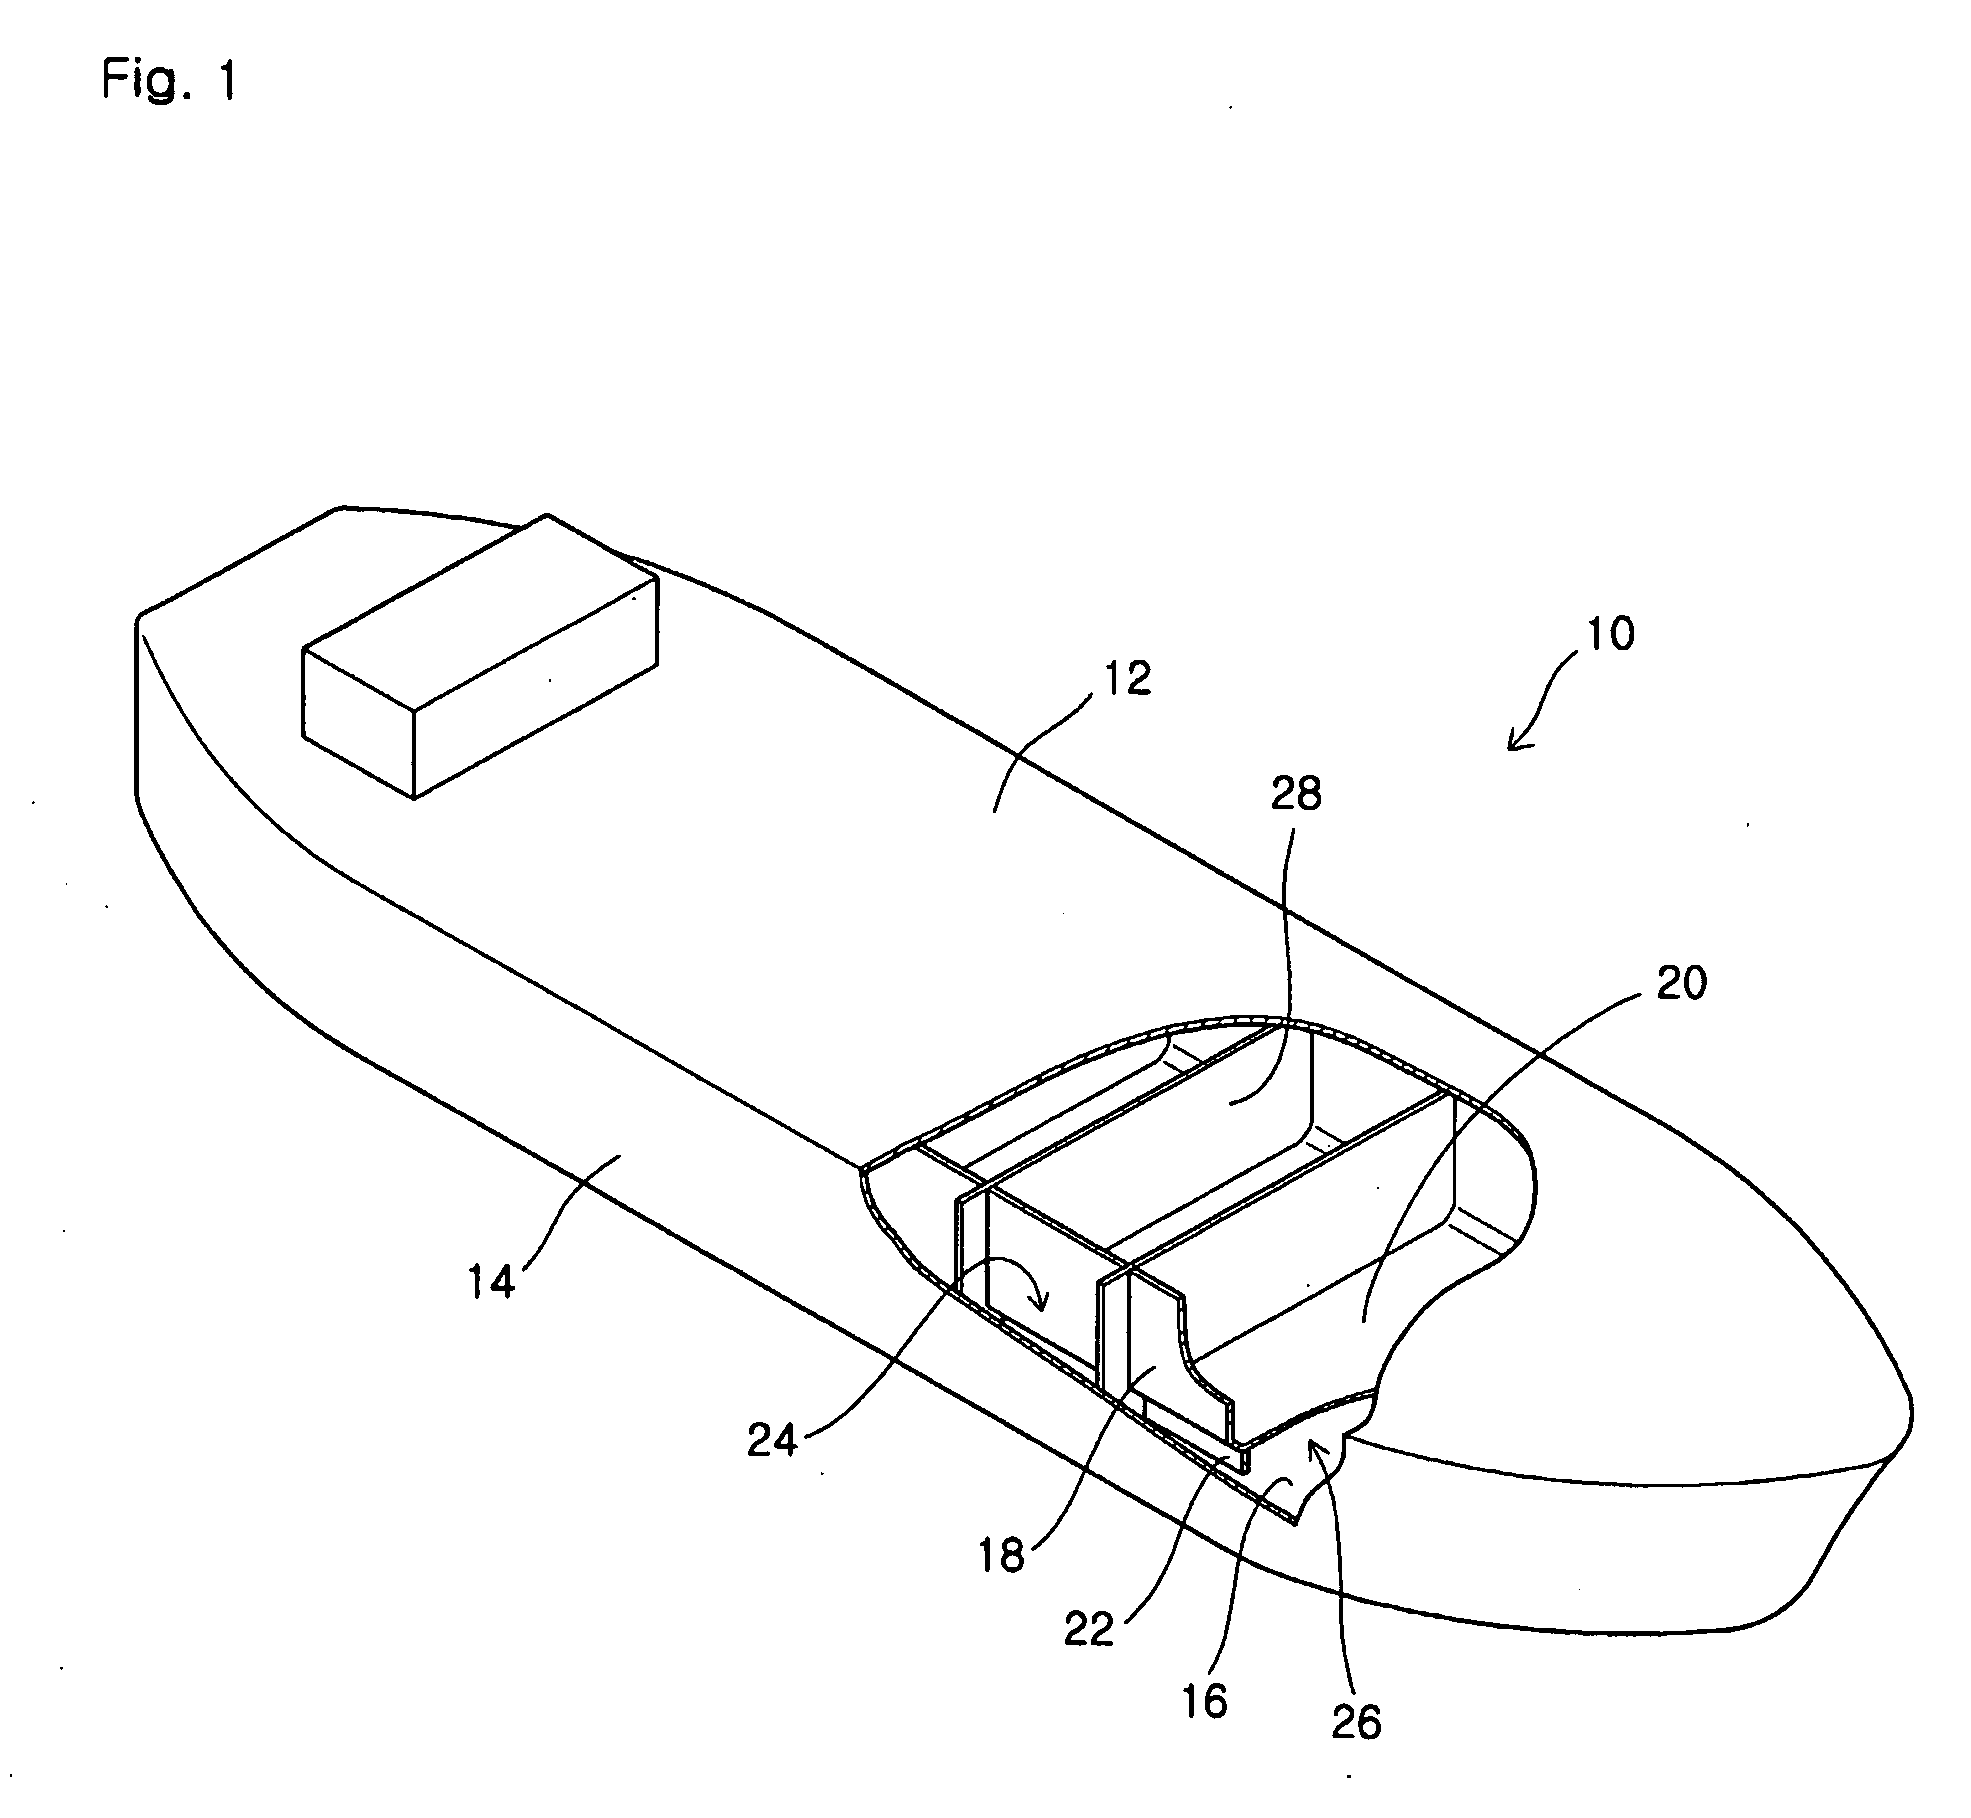 Vessel Including Automatic Ballast System Using Tubes